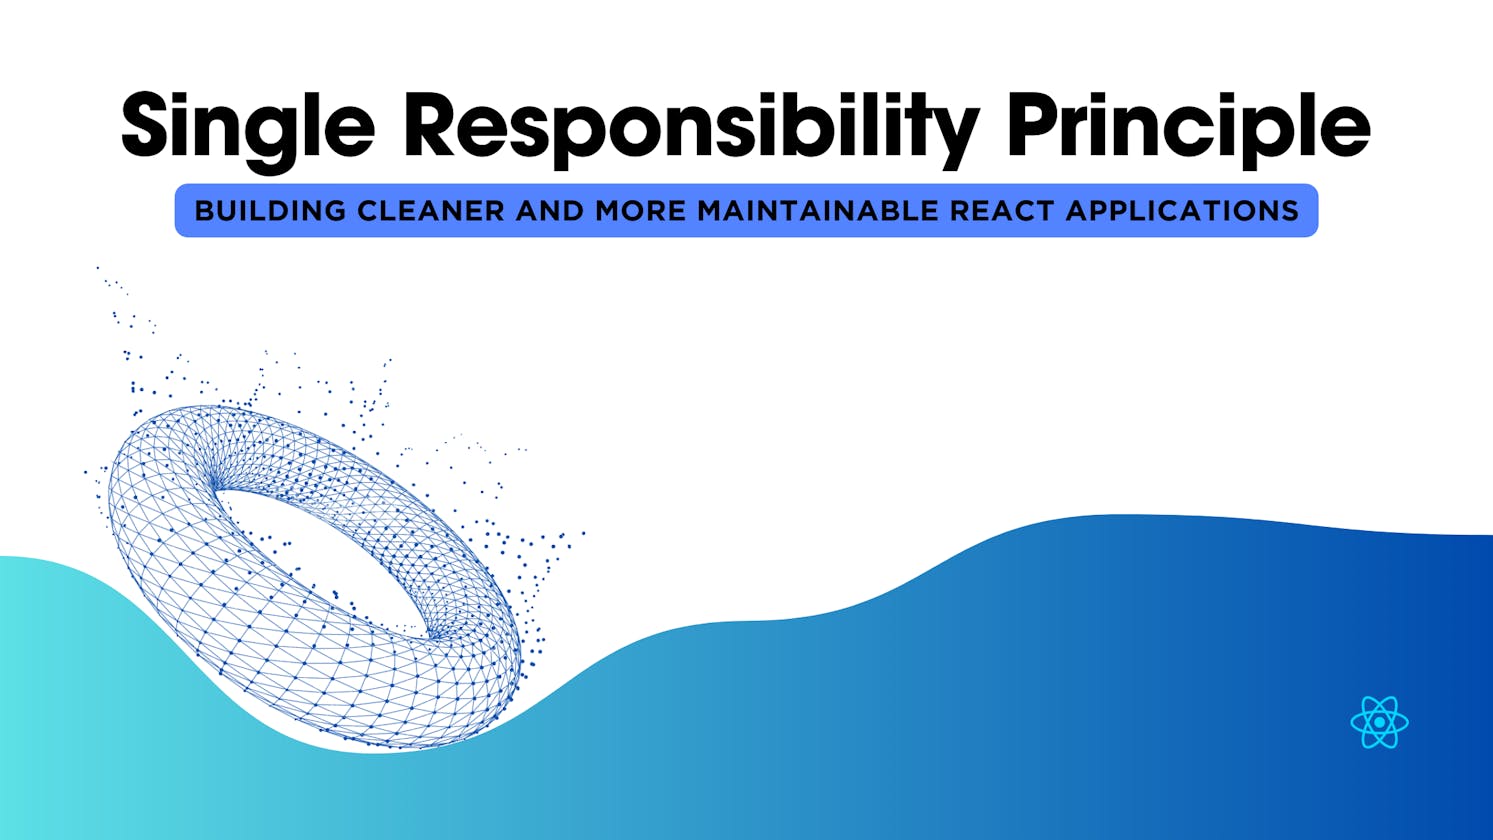 How to Improve React App Maintainability with Single Responsibility Principle